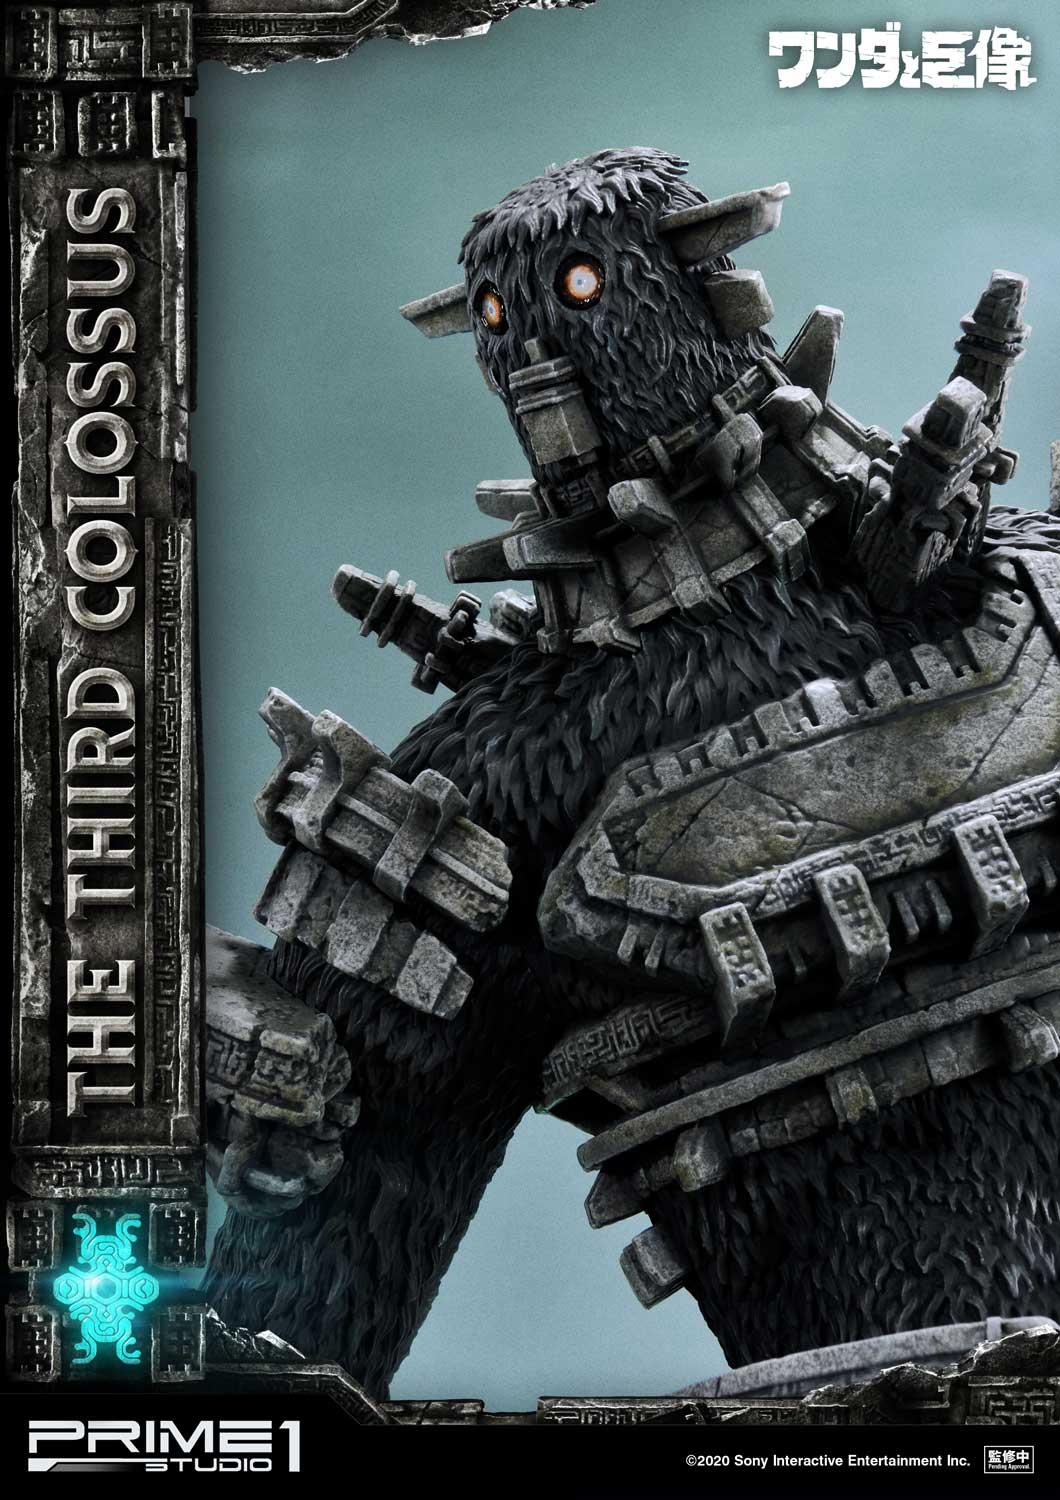 Shadow of the Colossus'' true masterstroke is alienation, not